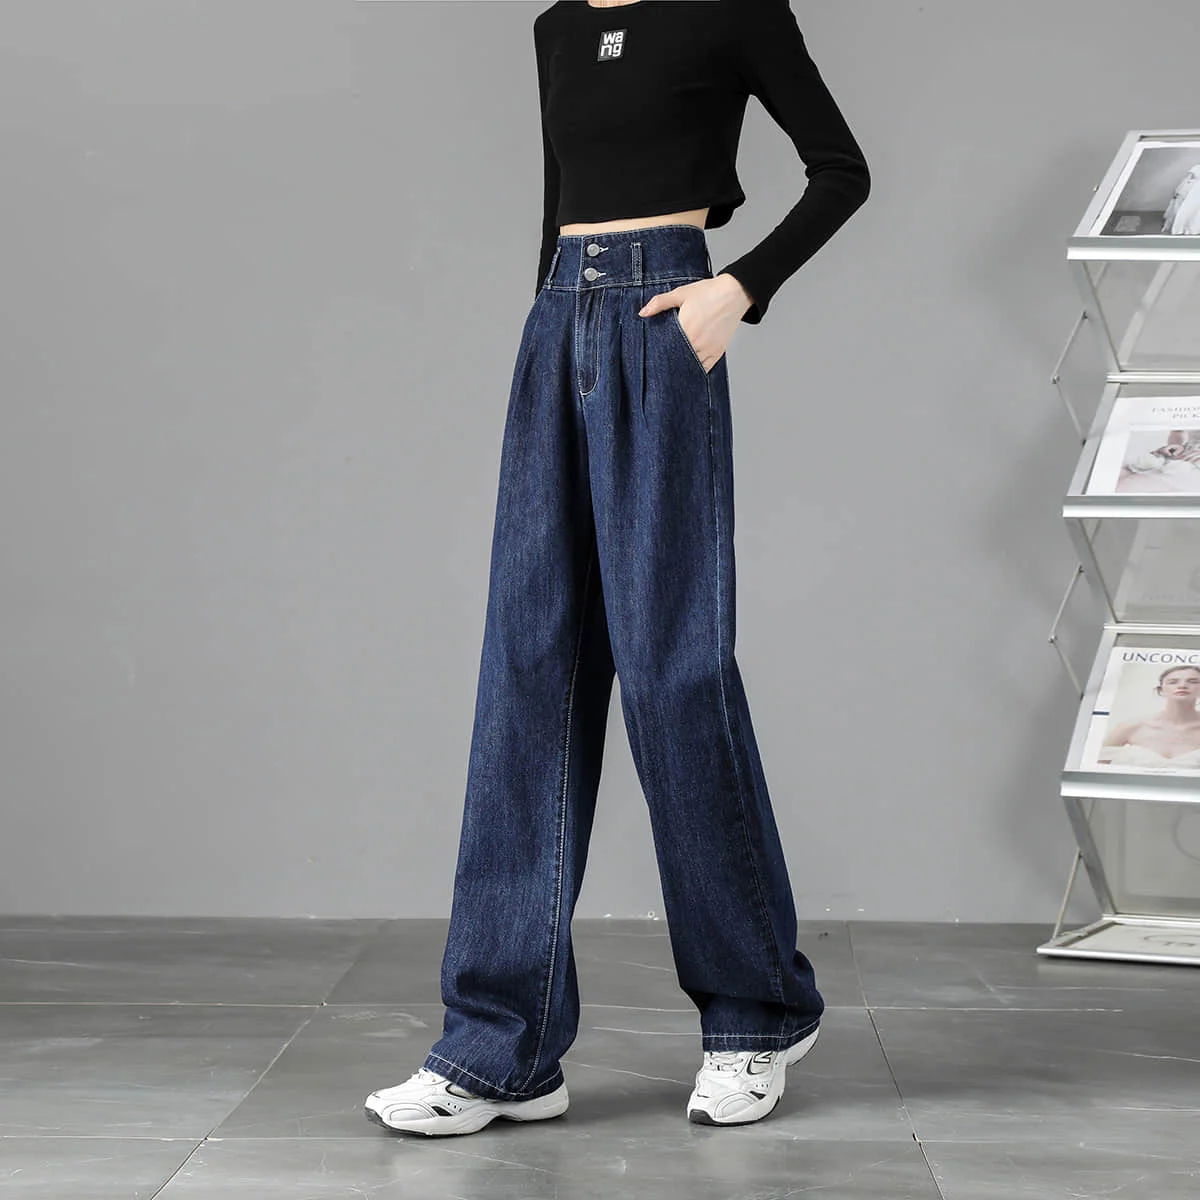 Woman Classic Jeans Luxury Brand Acne Ac Studios Lady Street Fashion Pants High Waist Jeans Female Washed Denim Fit Jeans